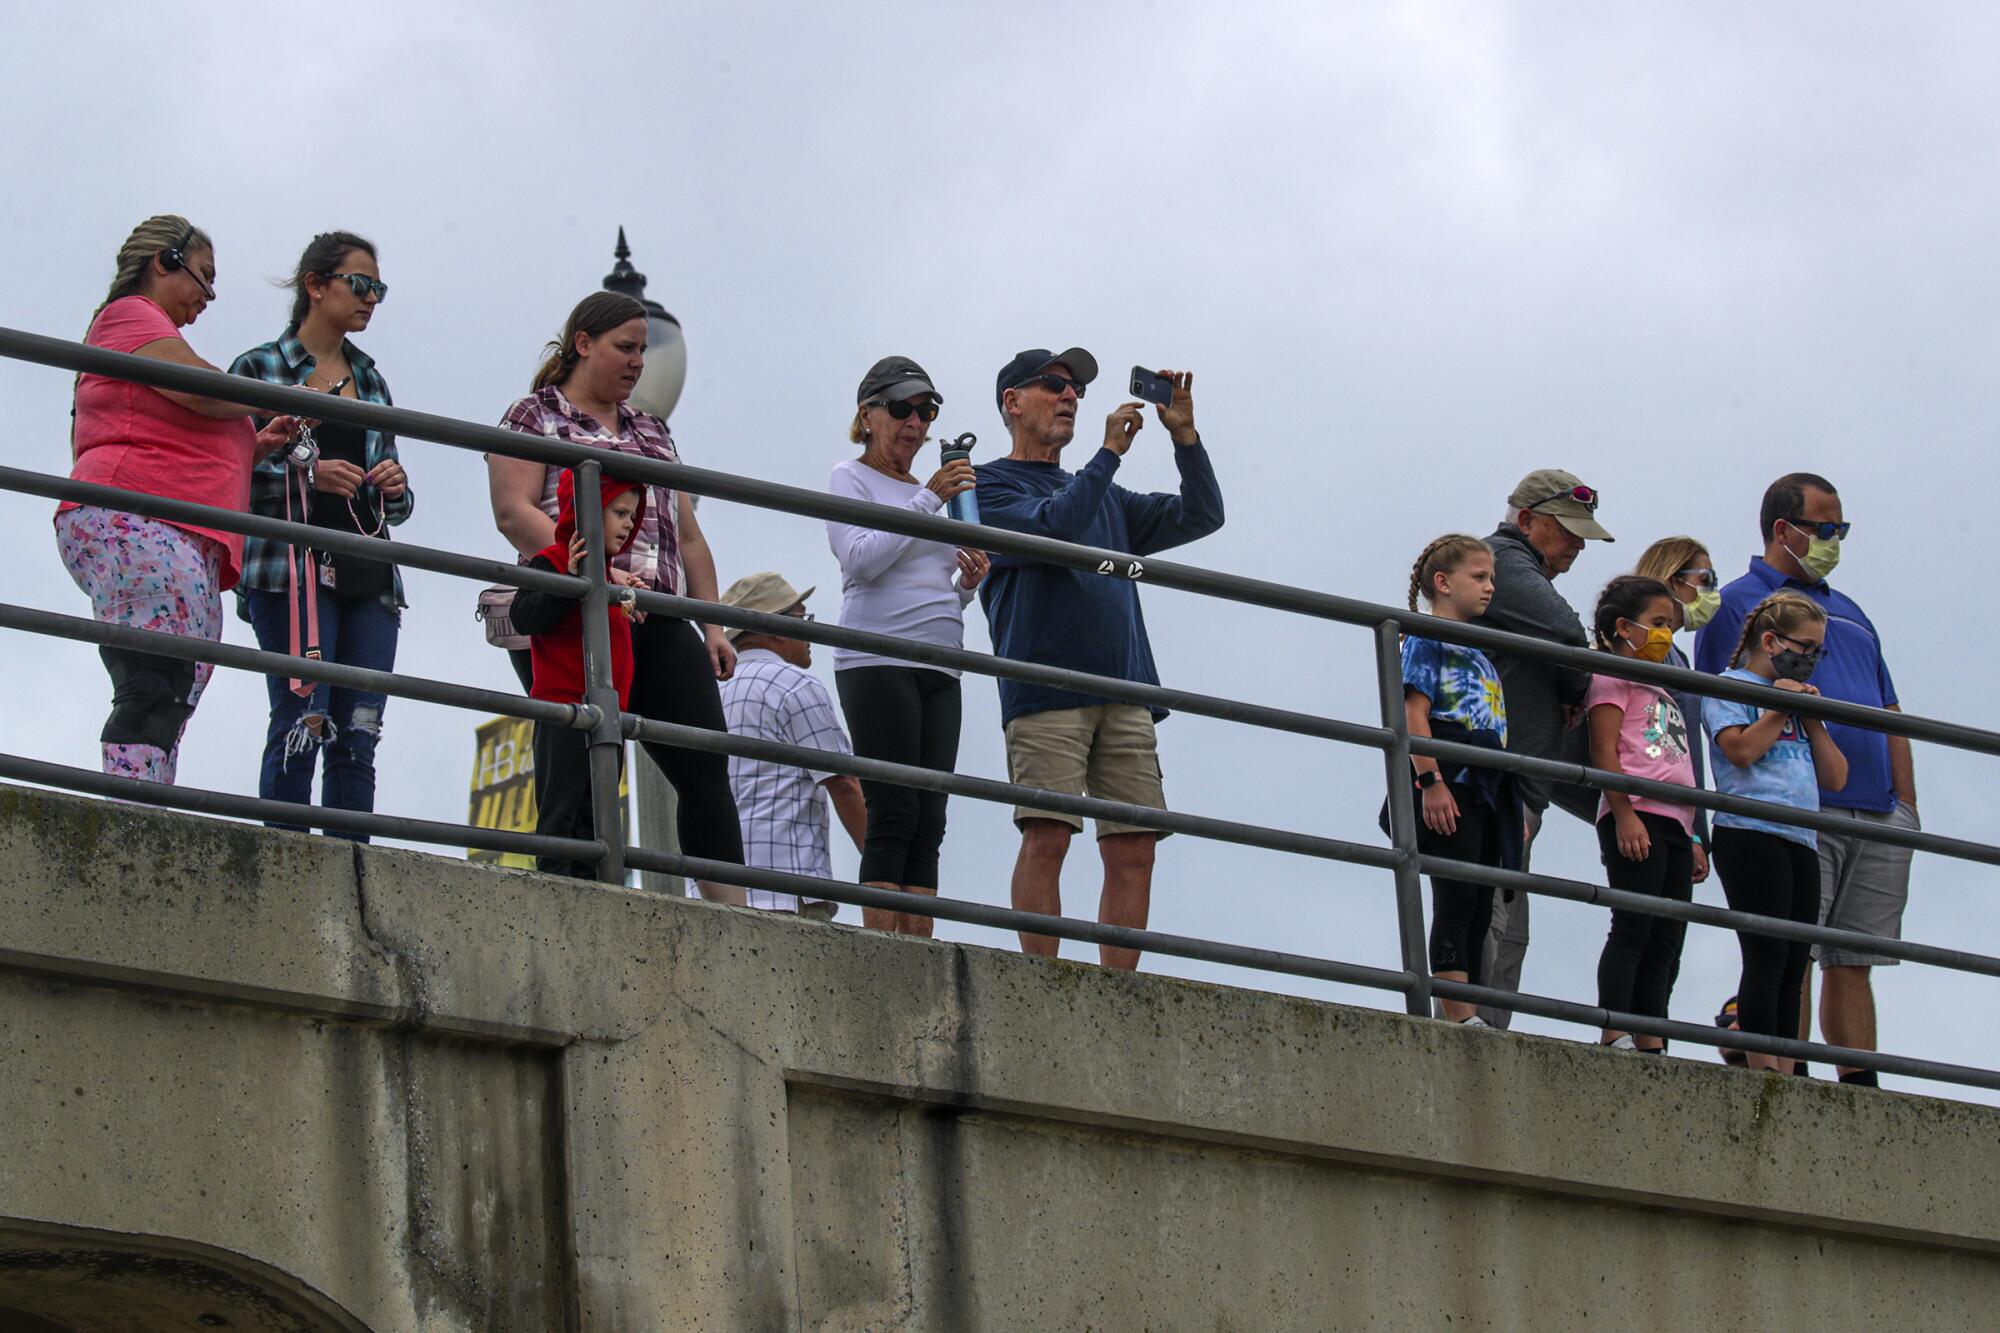 People line up on the pier, some holding up cellphones.